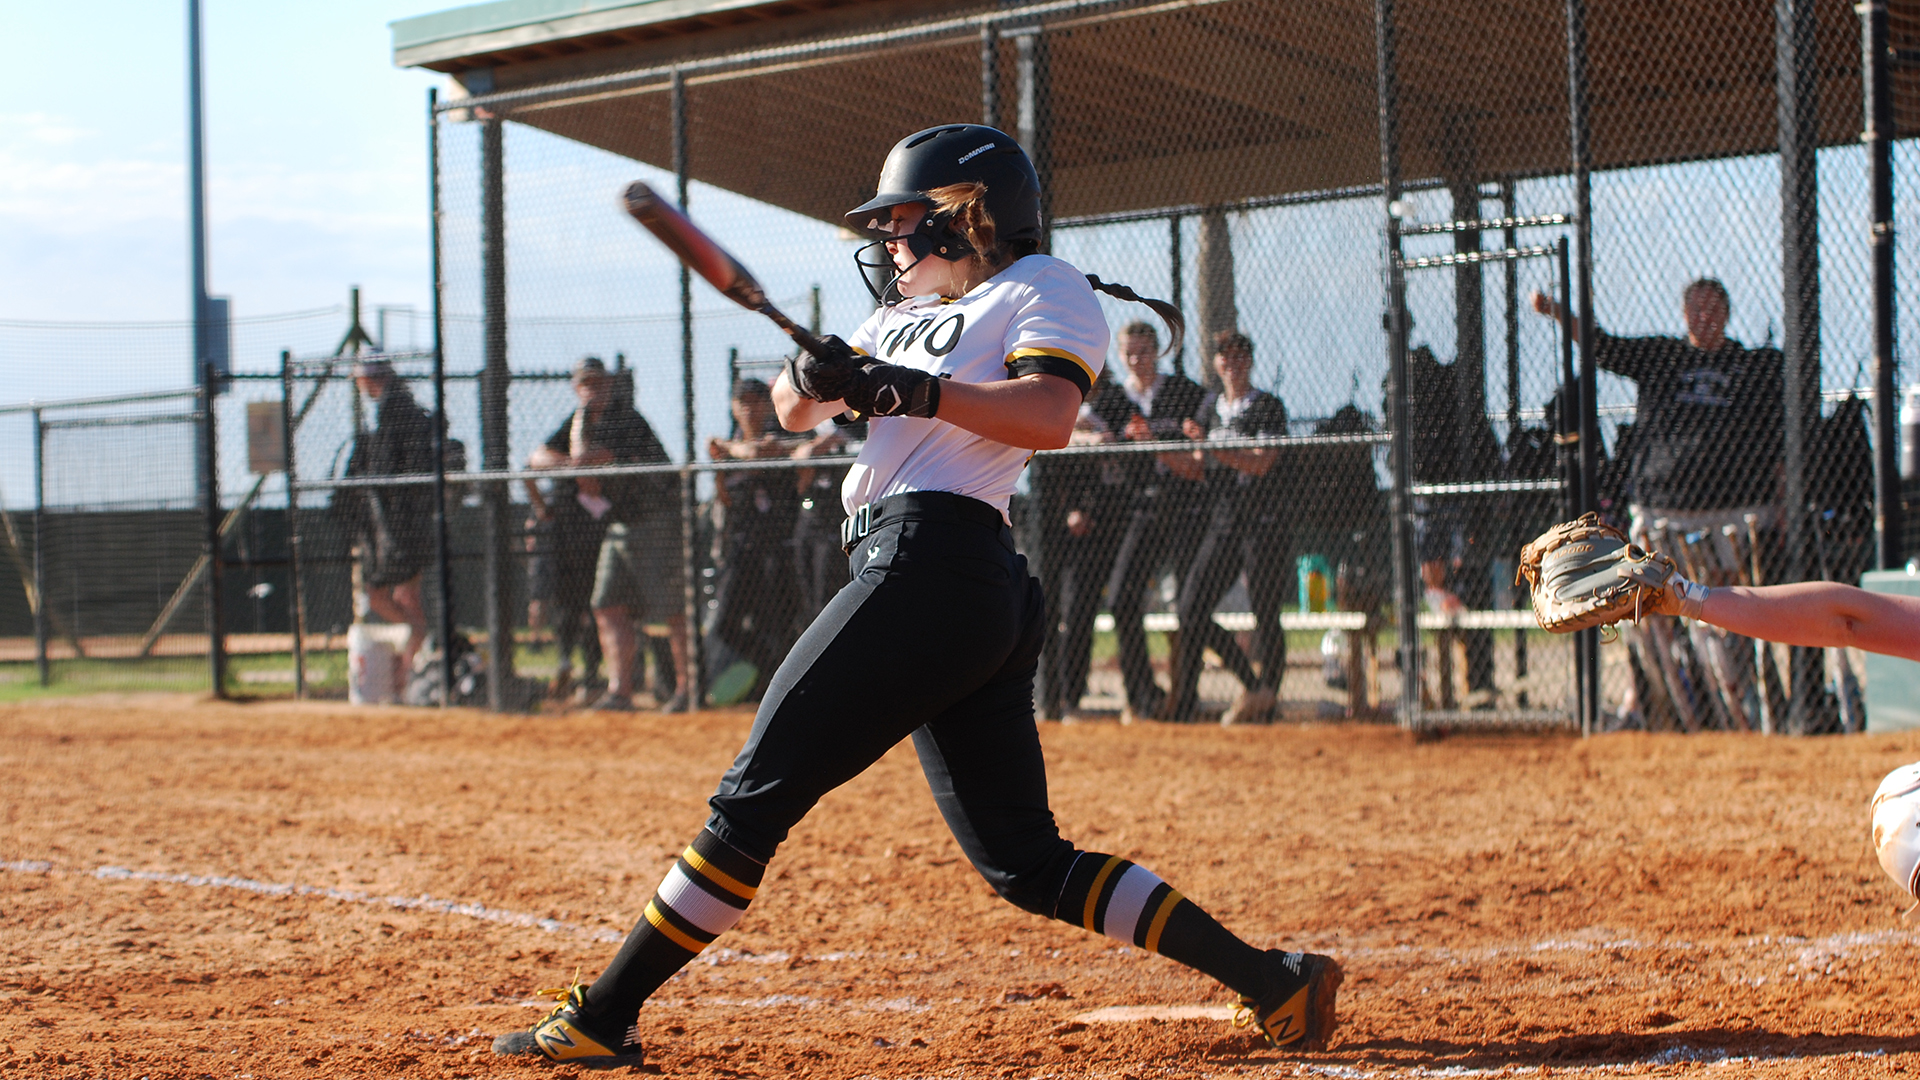 Grace Stevens had two hits and a career-best four RBIs during the Titans' win over the Polar Bears.